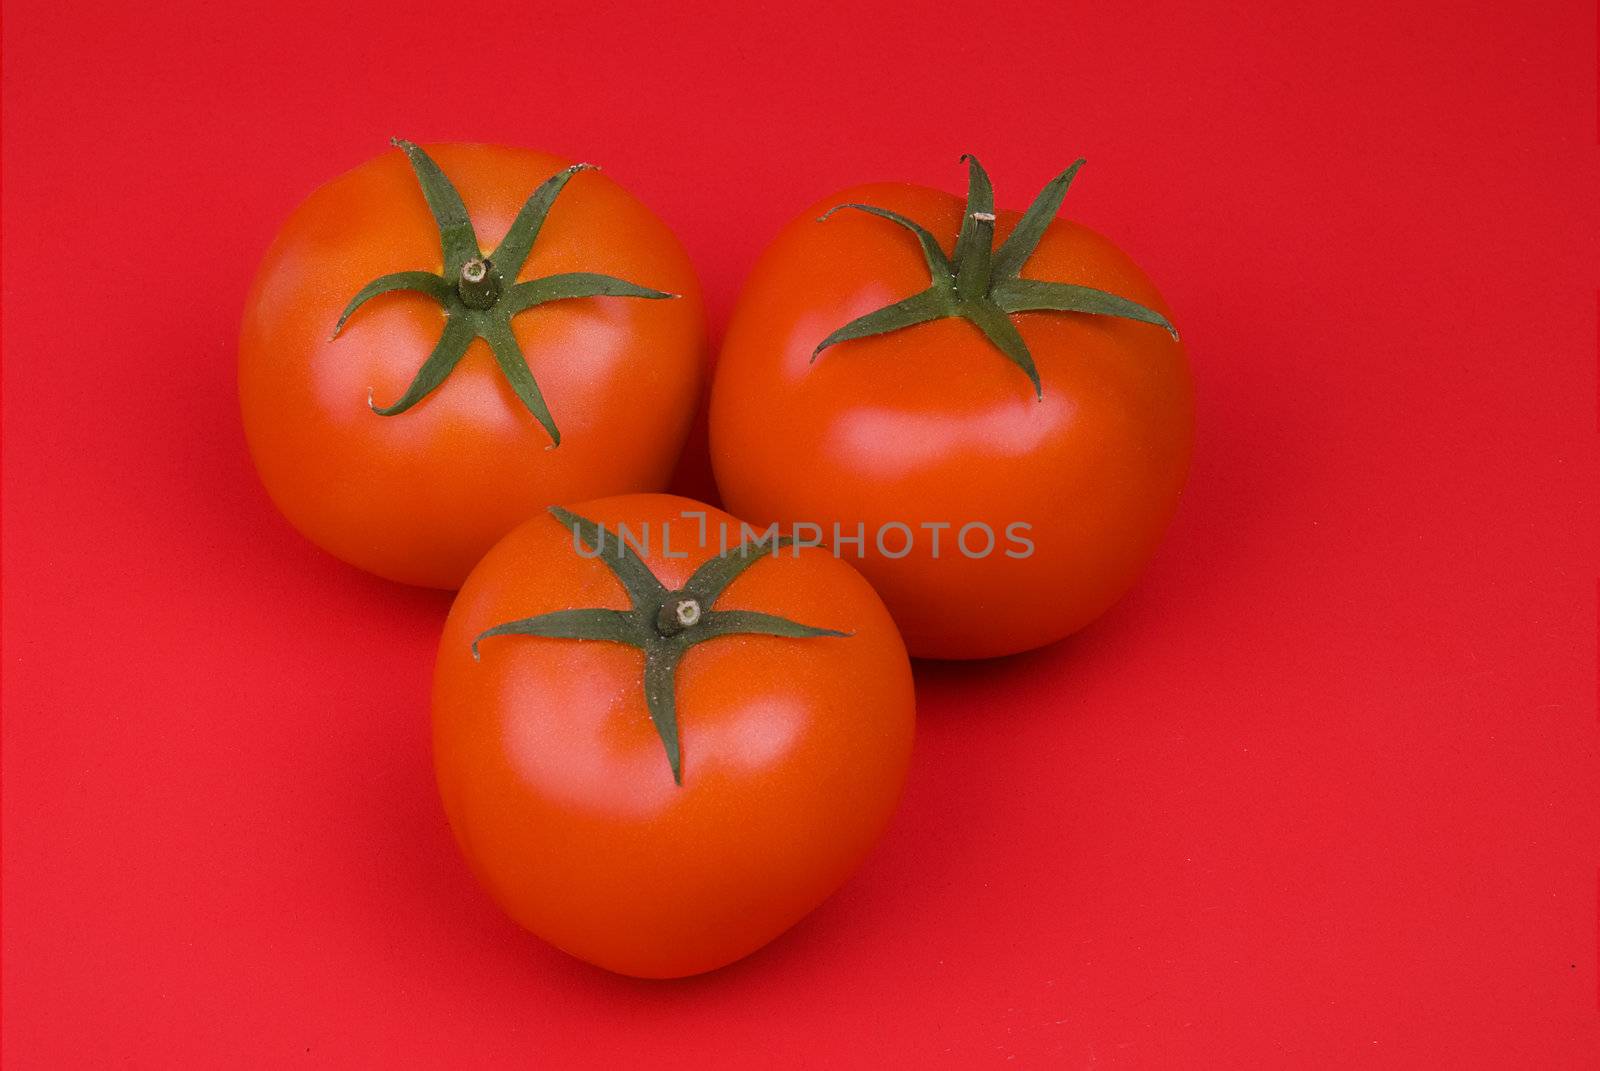 Group of red tomatos on red background